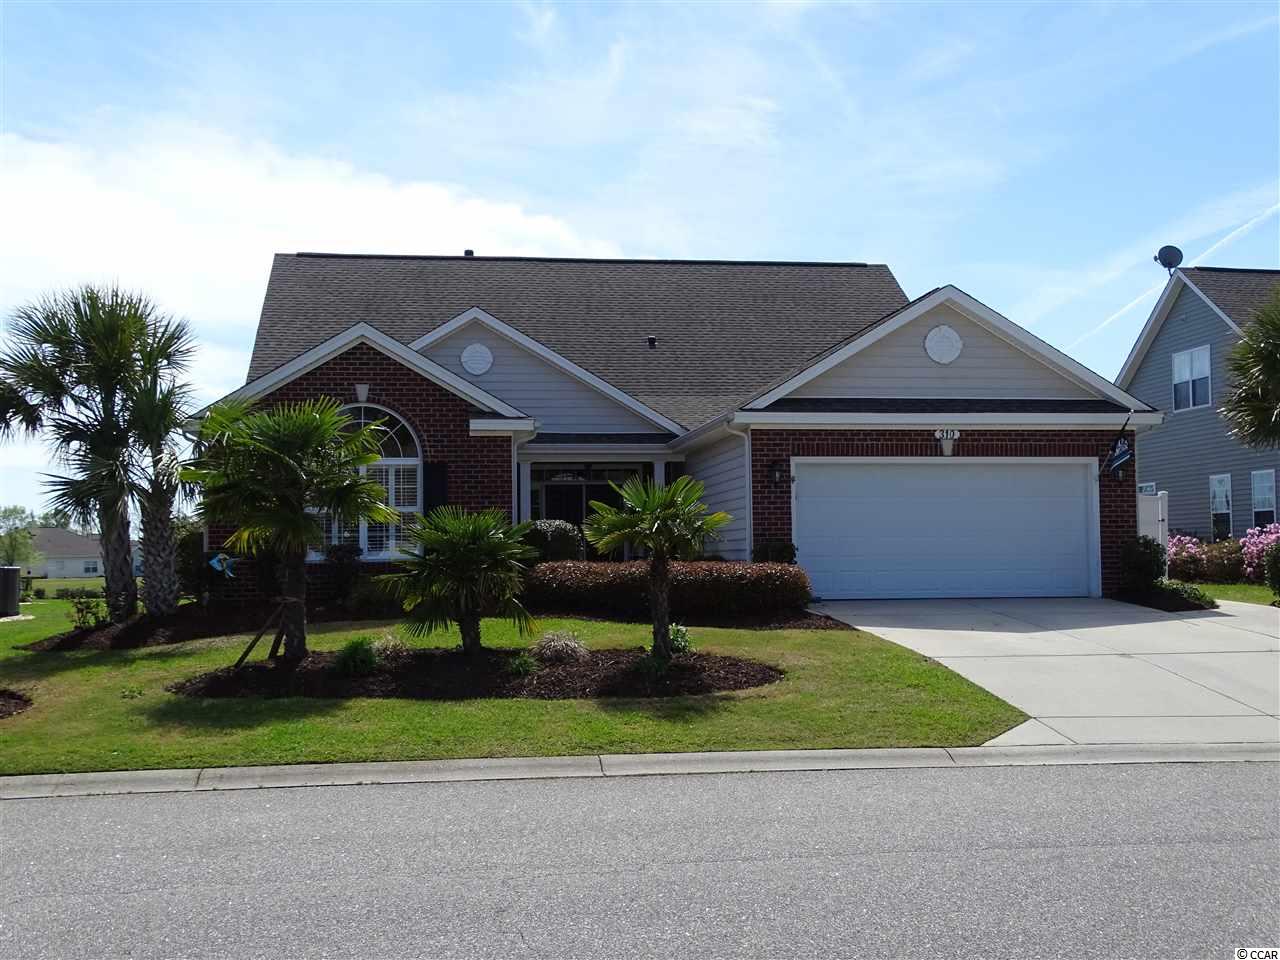 310 Carriage Lake Dr. Little River, SC 29566